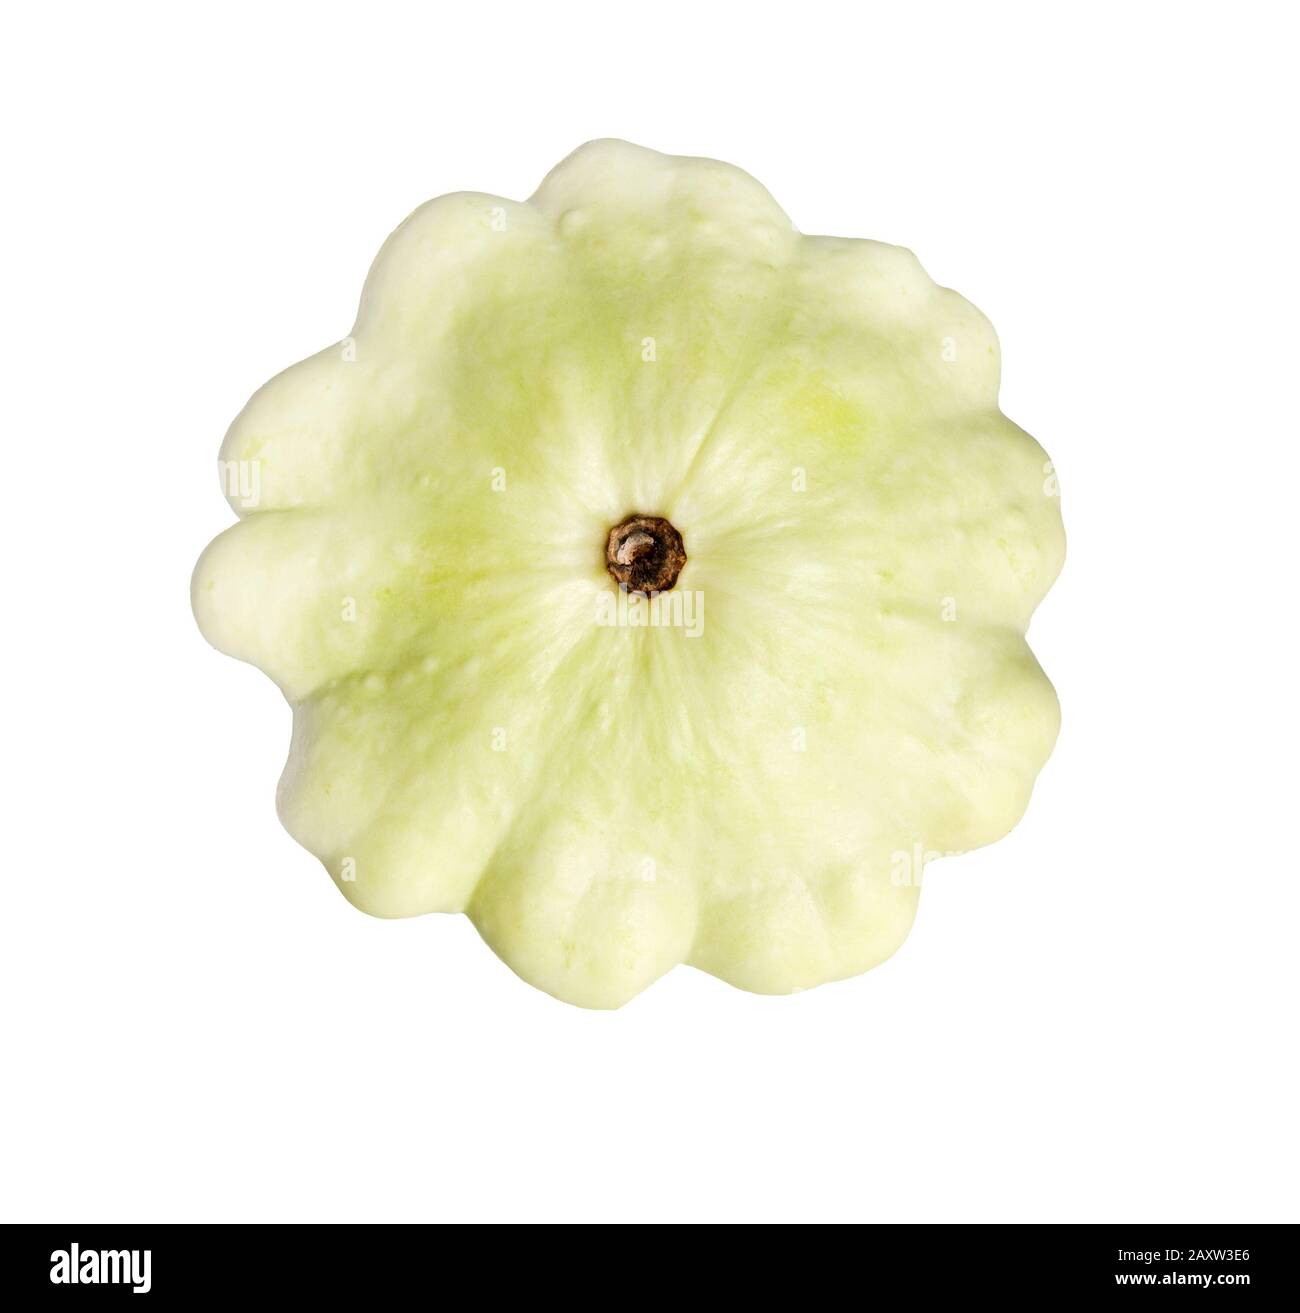 Button Squash or Pattypan Squash isolated on a white background. Stock Photo